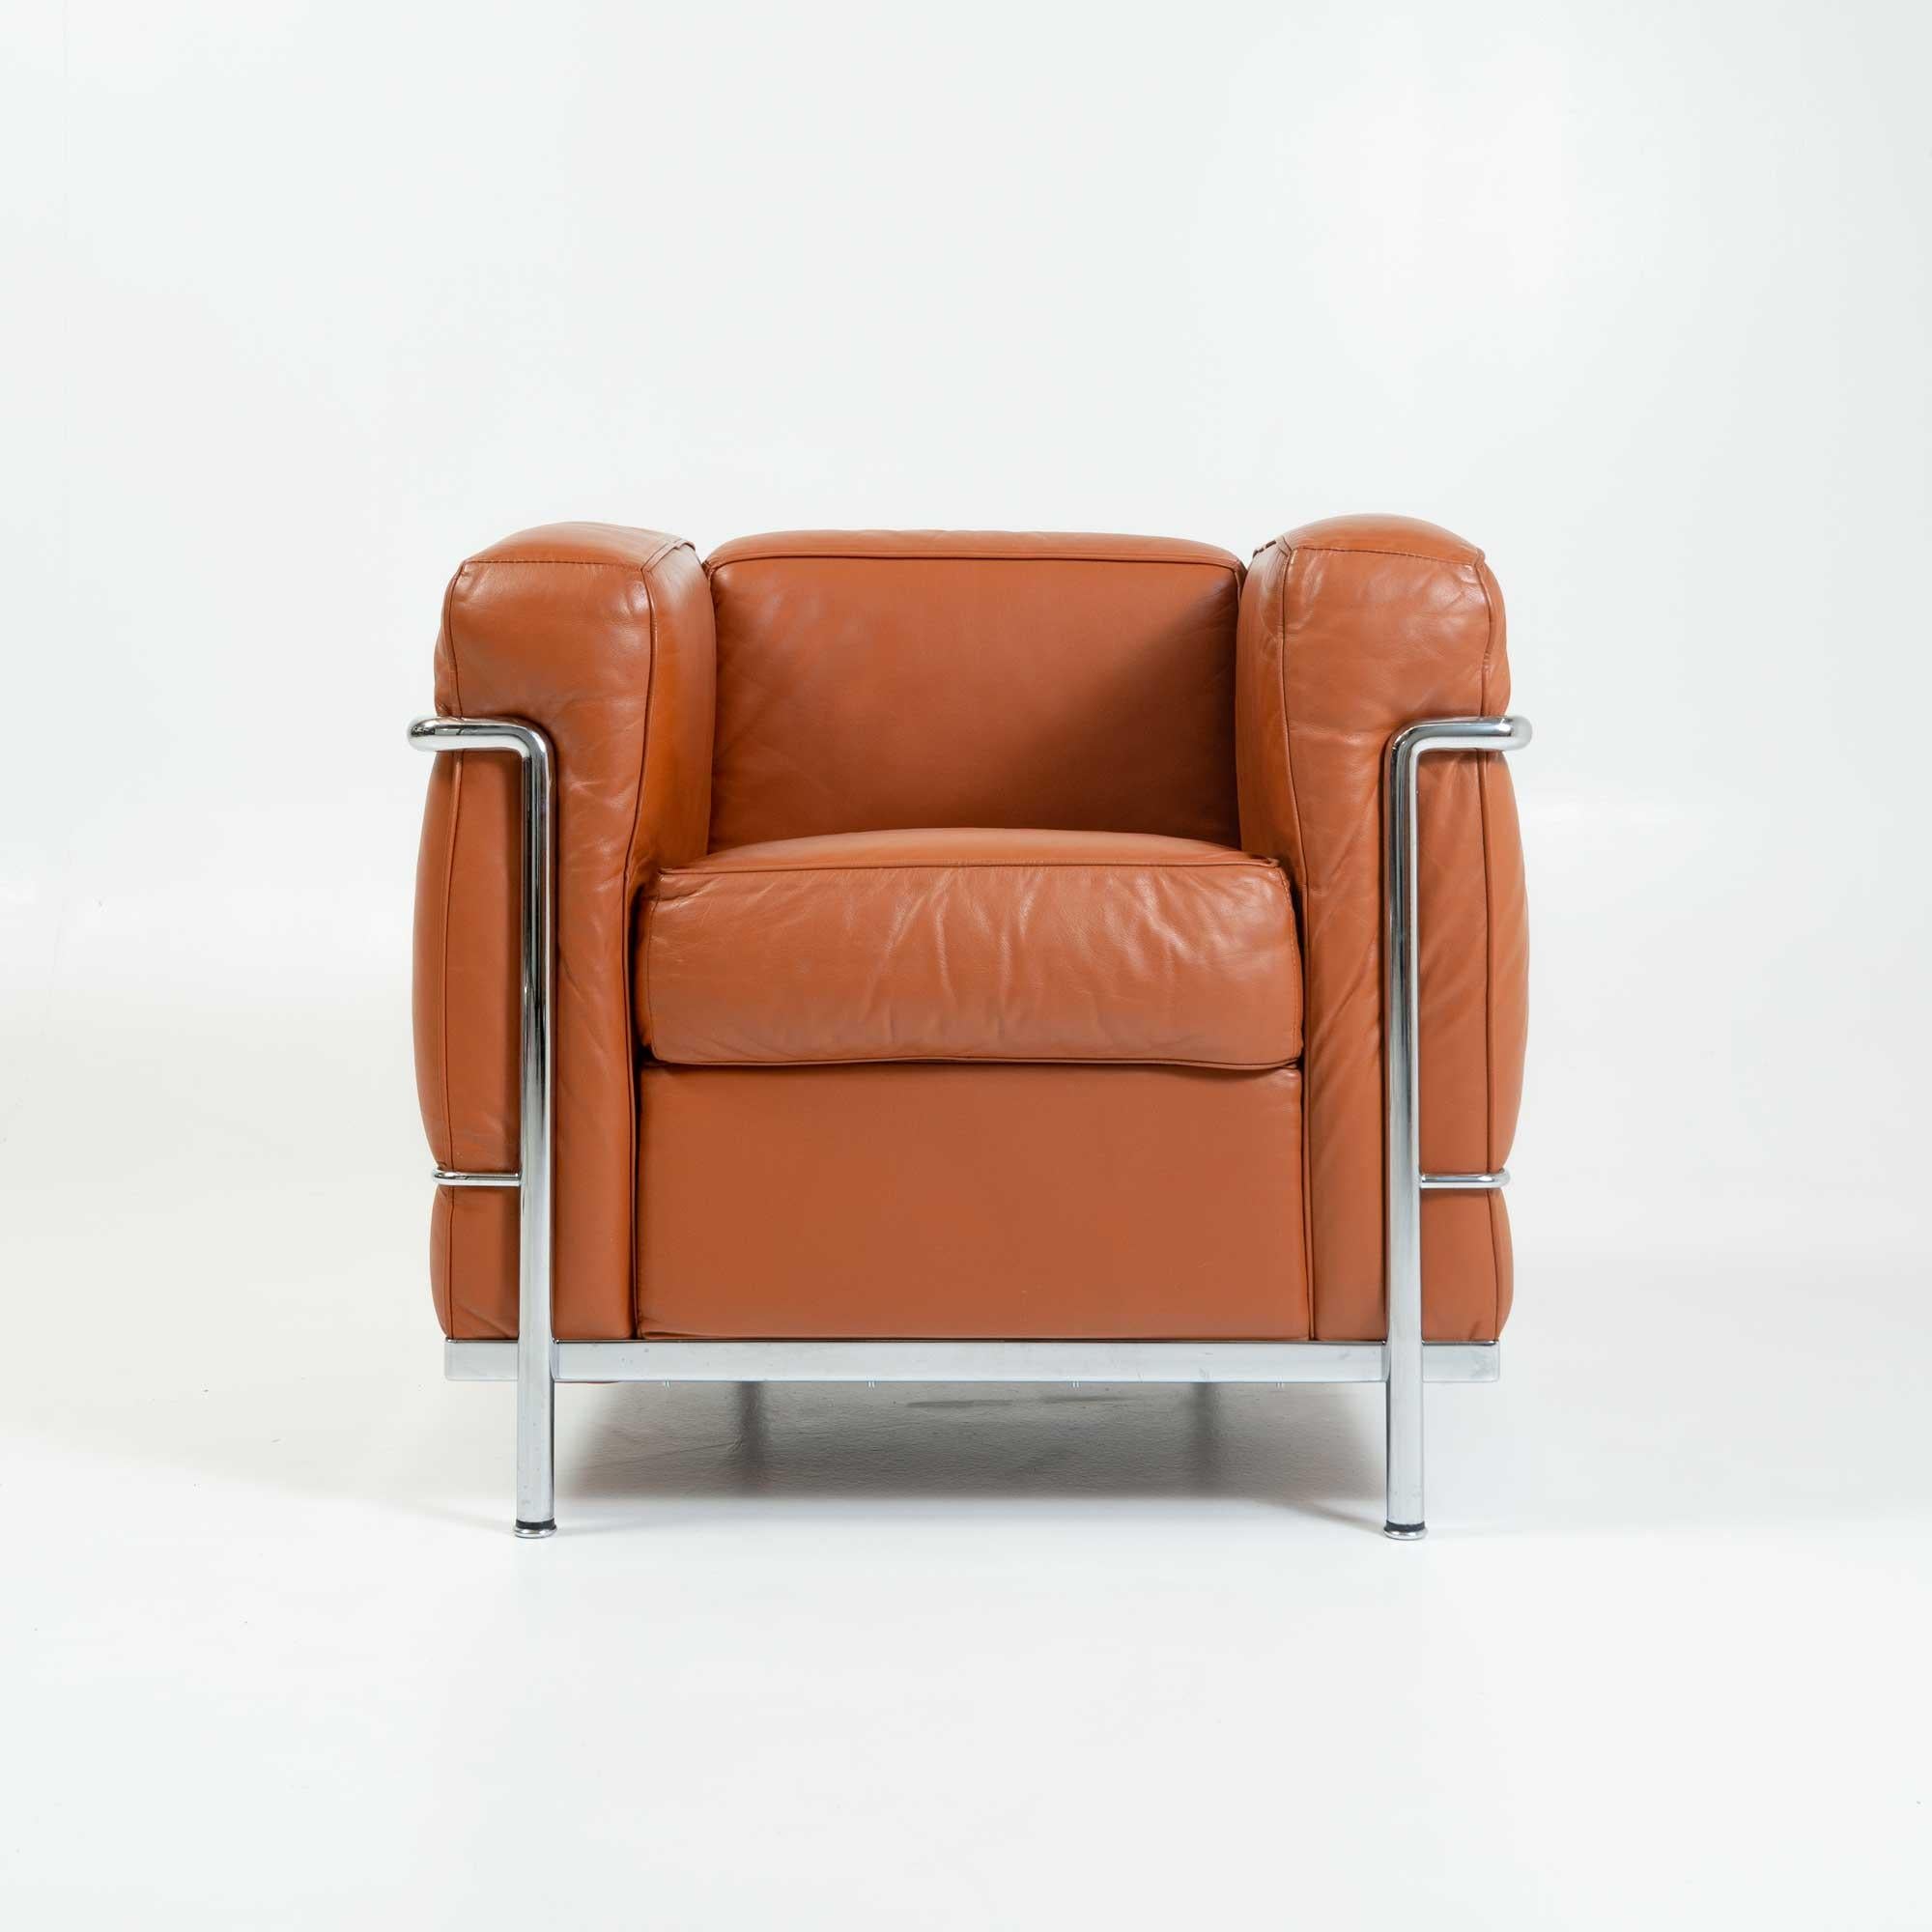 Great condition LC2 Petite Modele Armchair Designed by Le Corbusier, Pierre Jeanneret, Charlotte Perriand, produced by Cassina, in original brown leather cushions and chrome frame. The armchair is in great condition overall, very minor wear to the